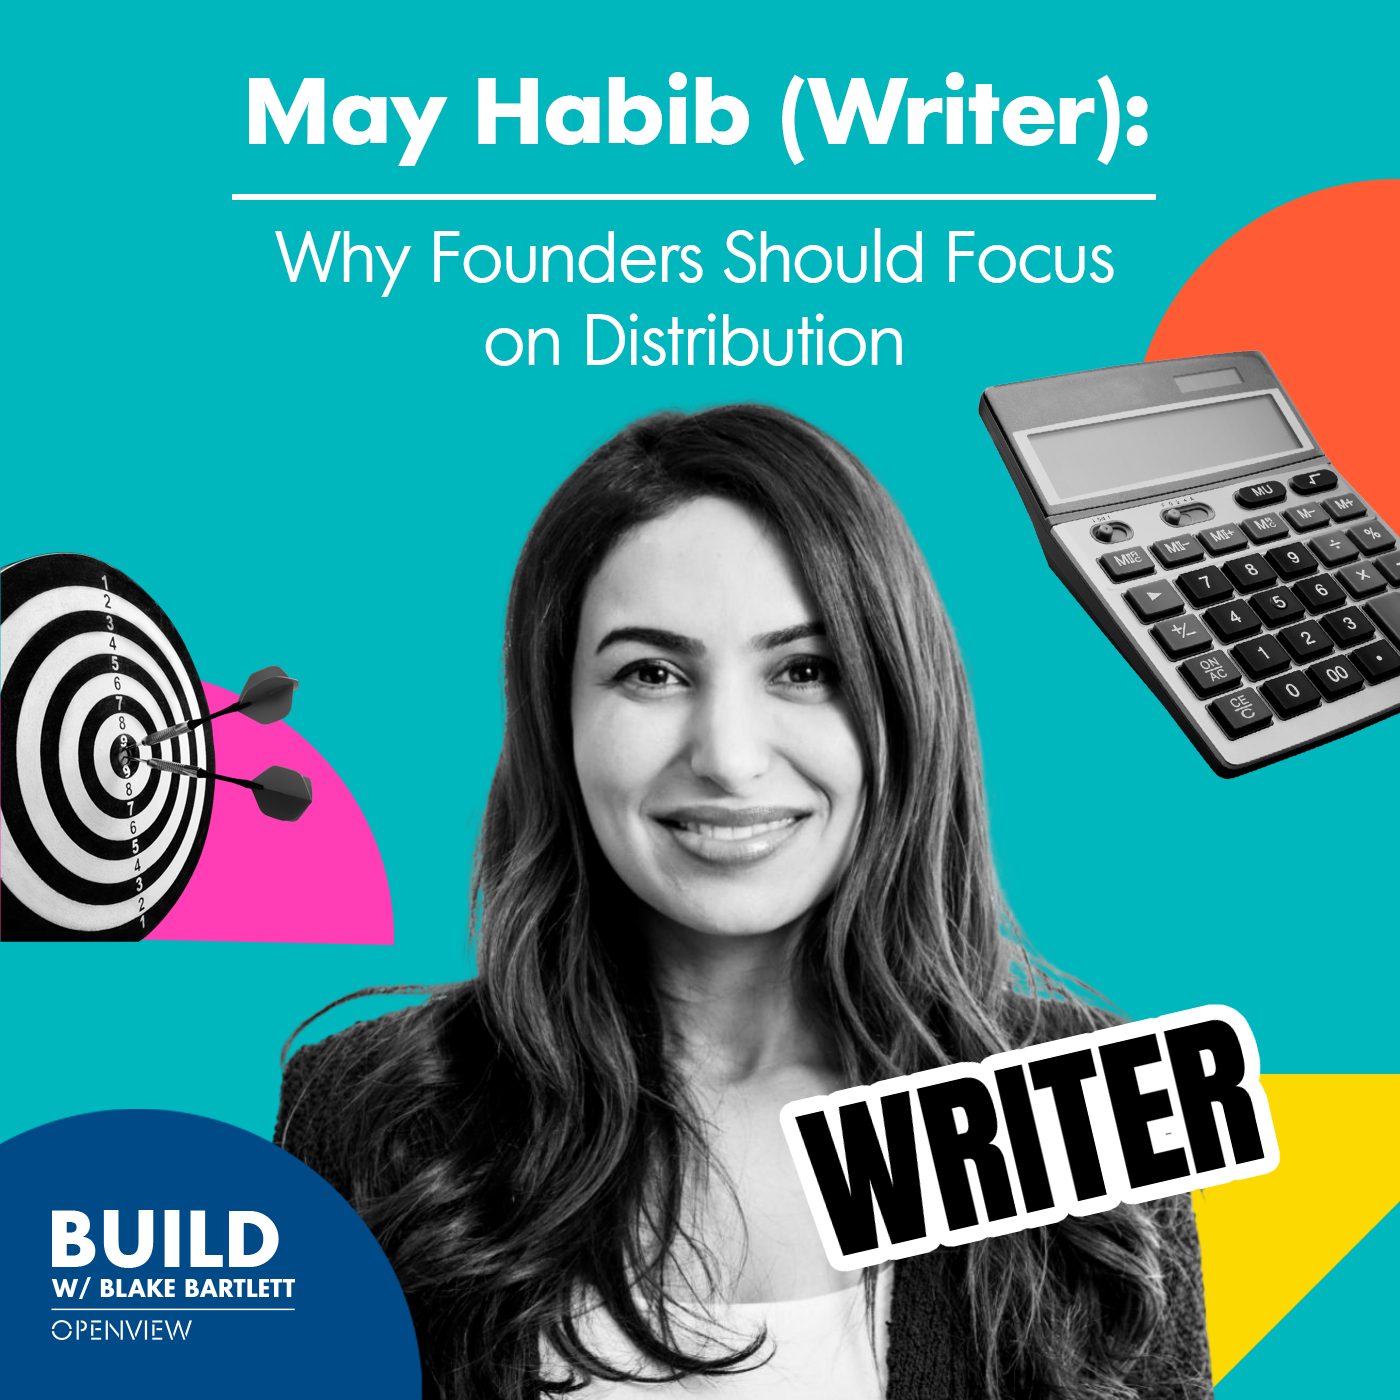 May Habib (Writer): Why Founders Should Focus on Distribution